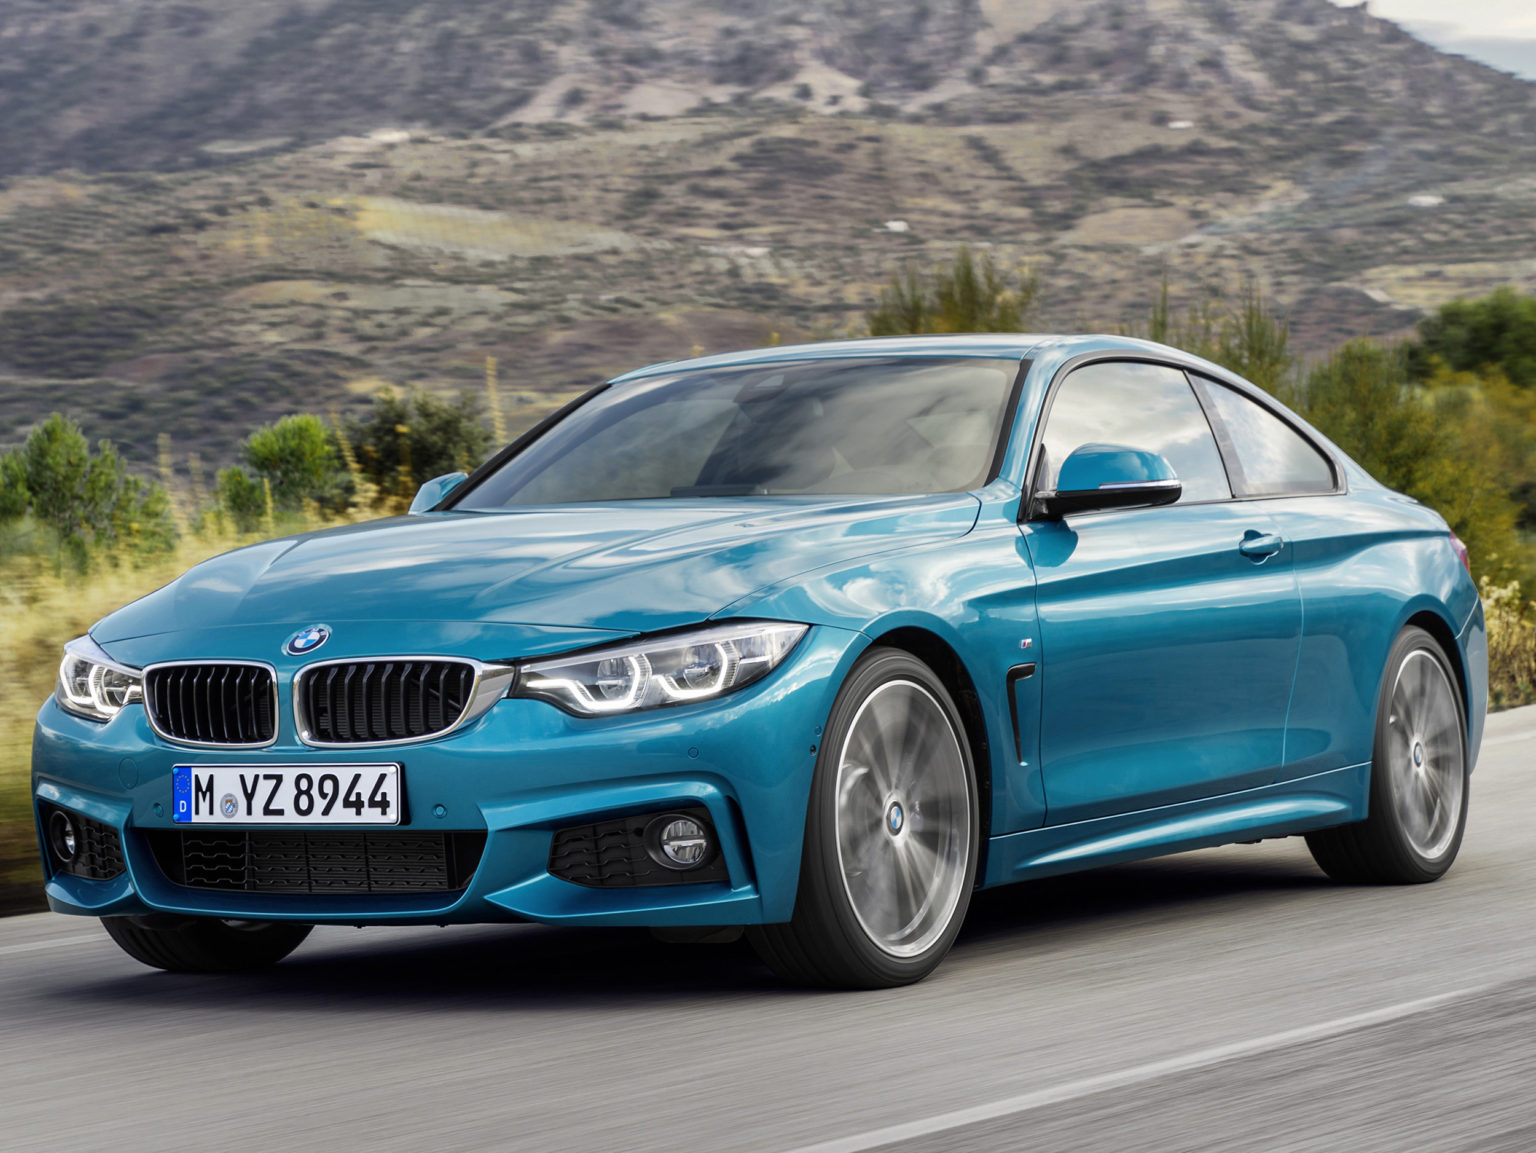 The BMW 4 Series was good when it debuted, and it remains a respectable ride today.